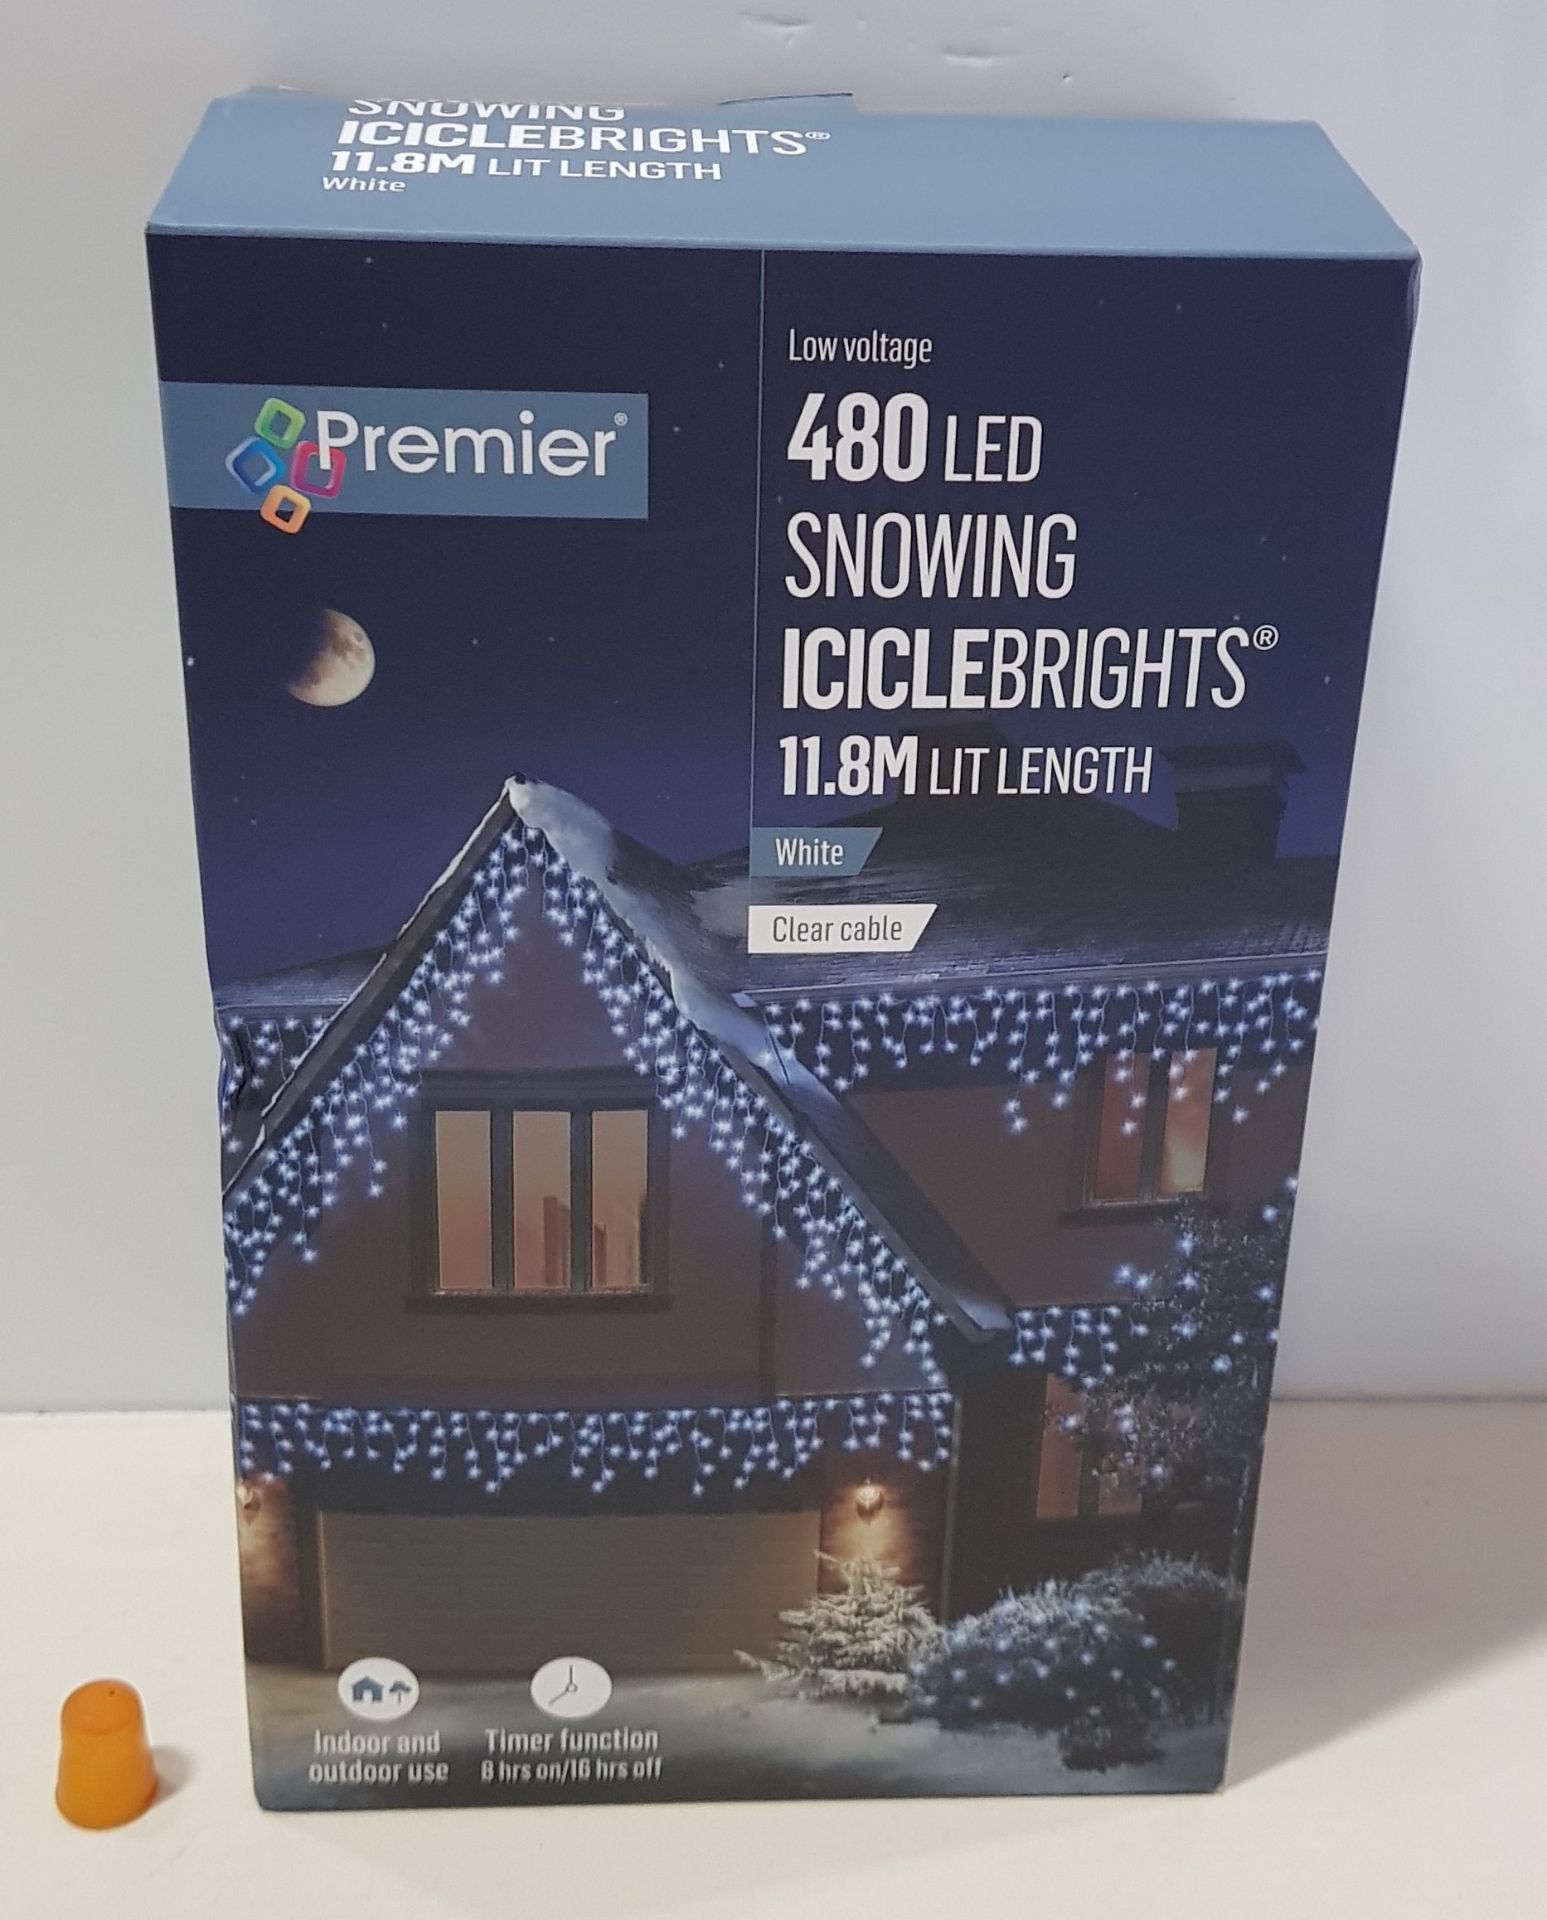 5 X BRAND NEW PREMIER LOW VOLTAGE 480 LED SNOWING ICICLEBRIGHTS - 11.8 M LIT LENGTH IN BLUE AND